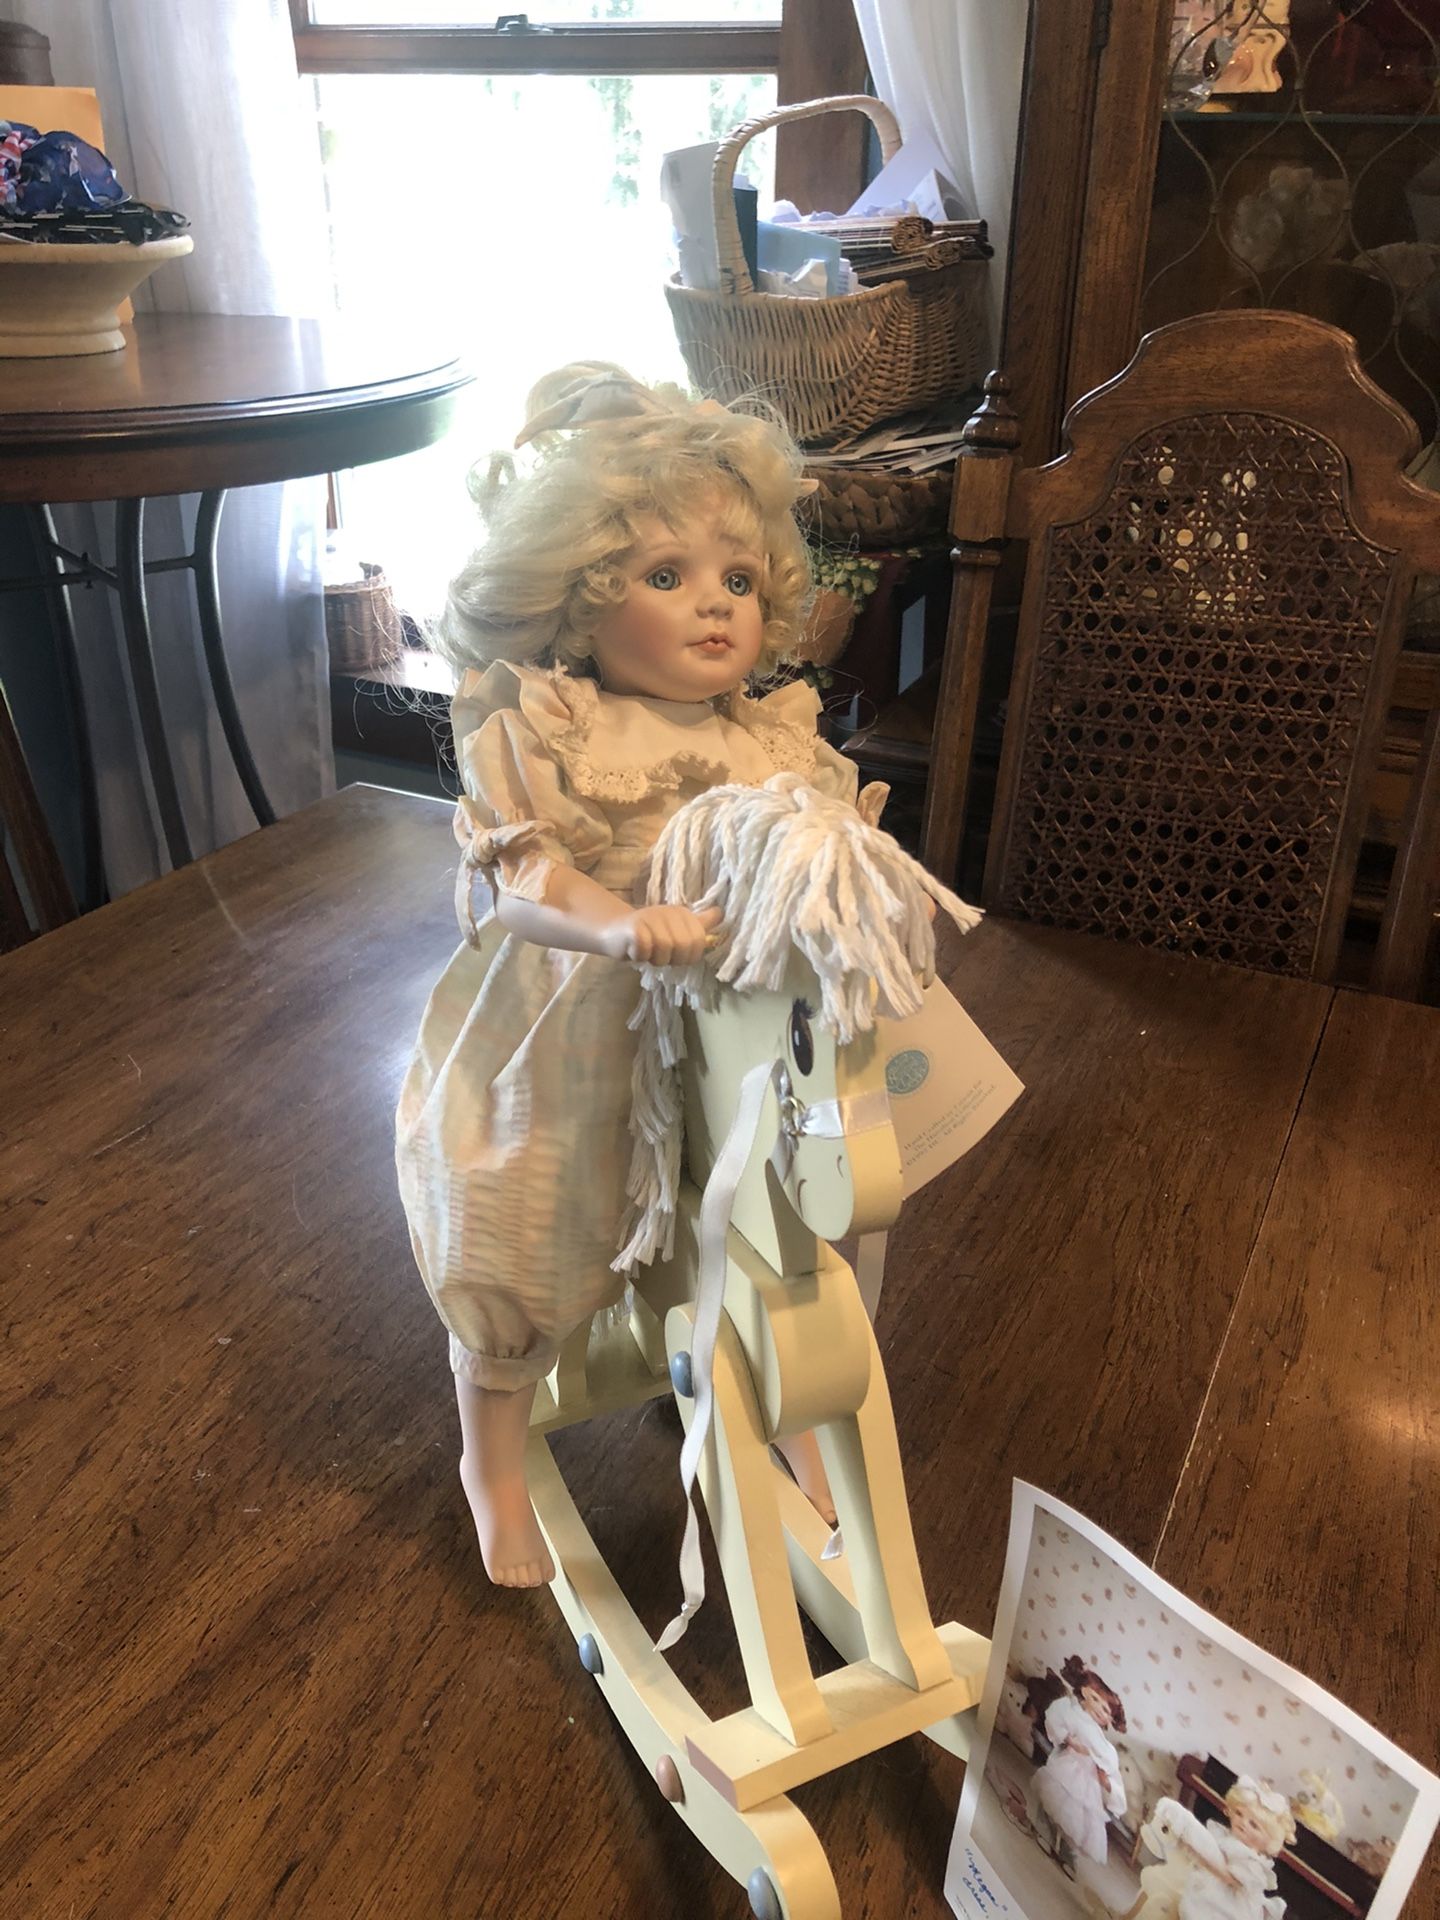 Porcelain doll on rocking horse, not a toy